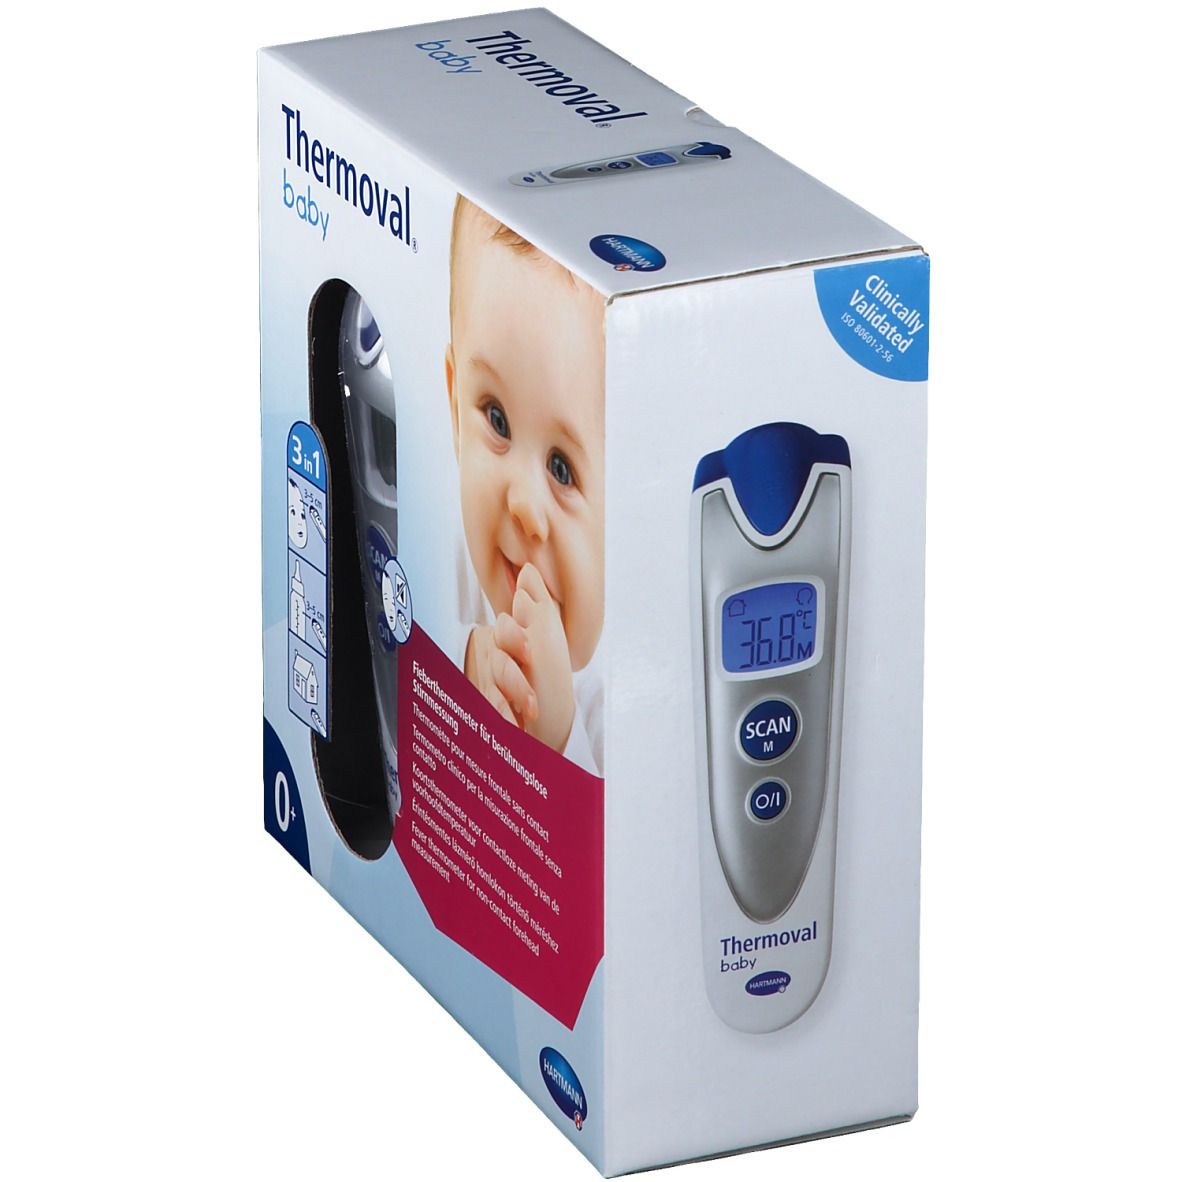 Berührungsloses Thermometer Thermoval baby Hartmann - OMsafe